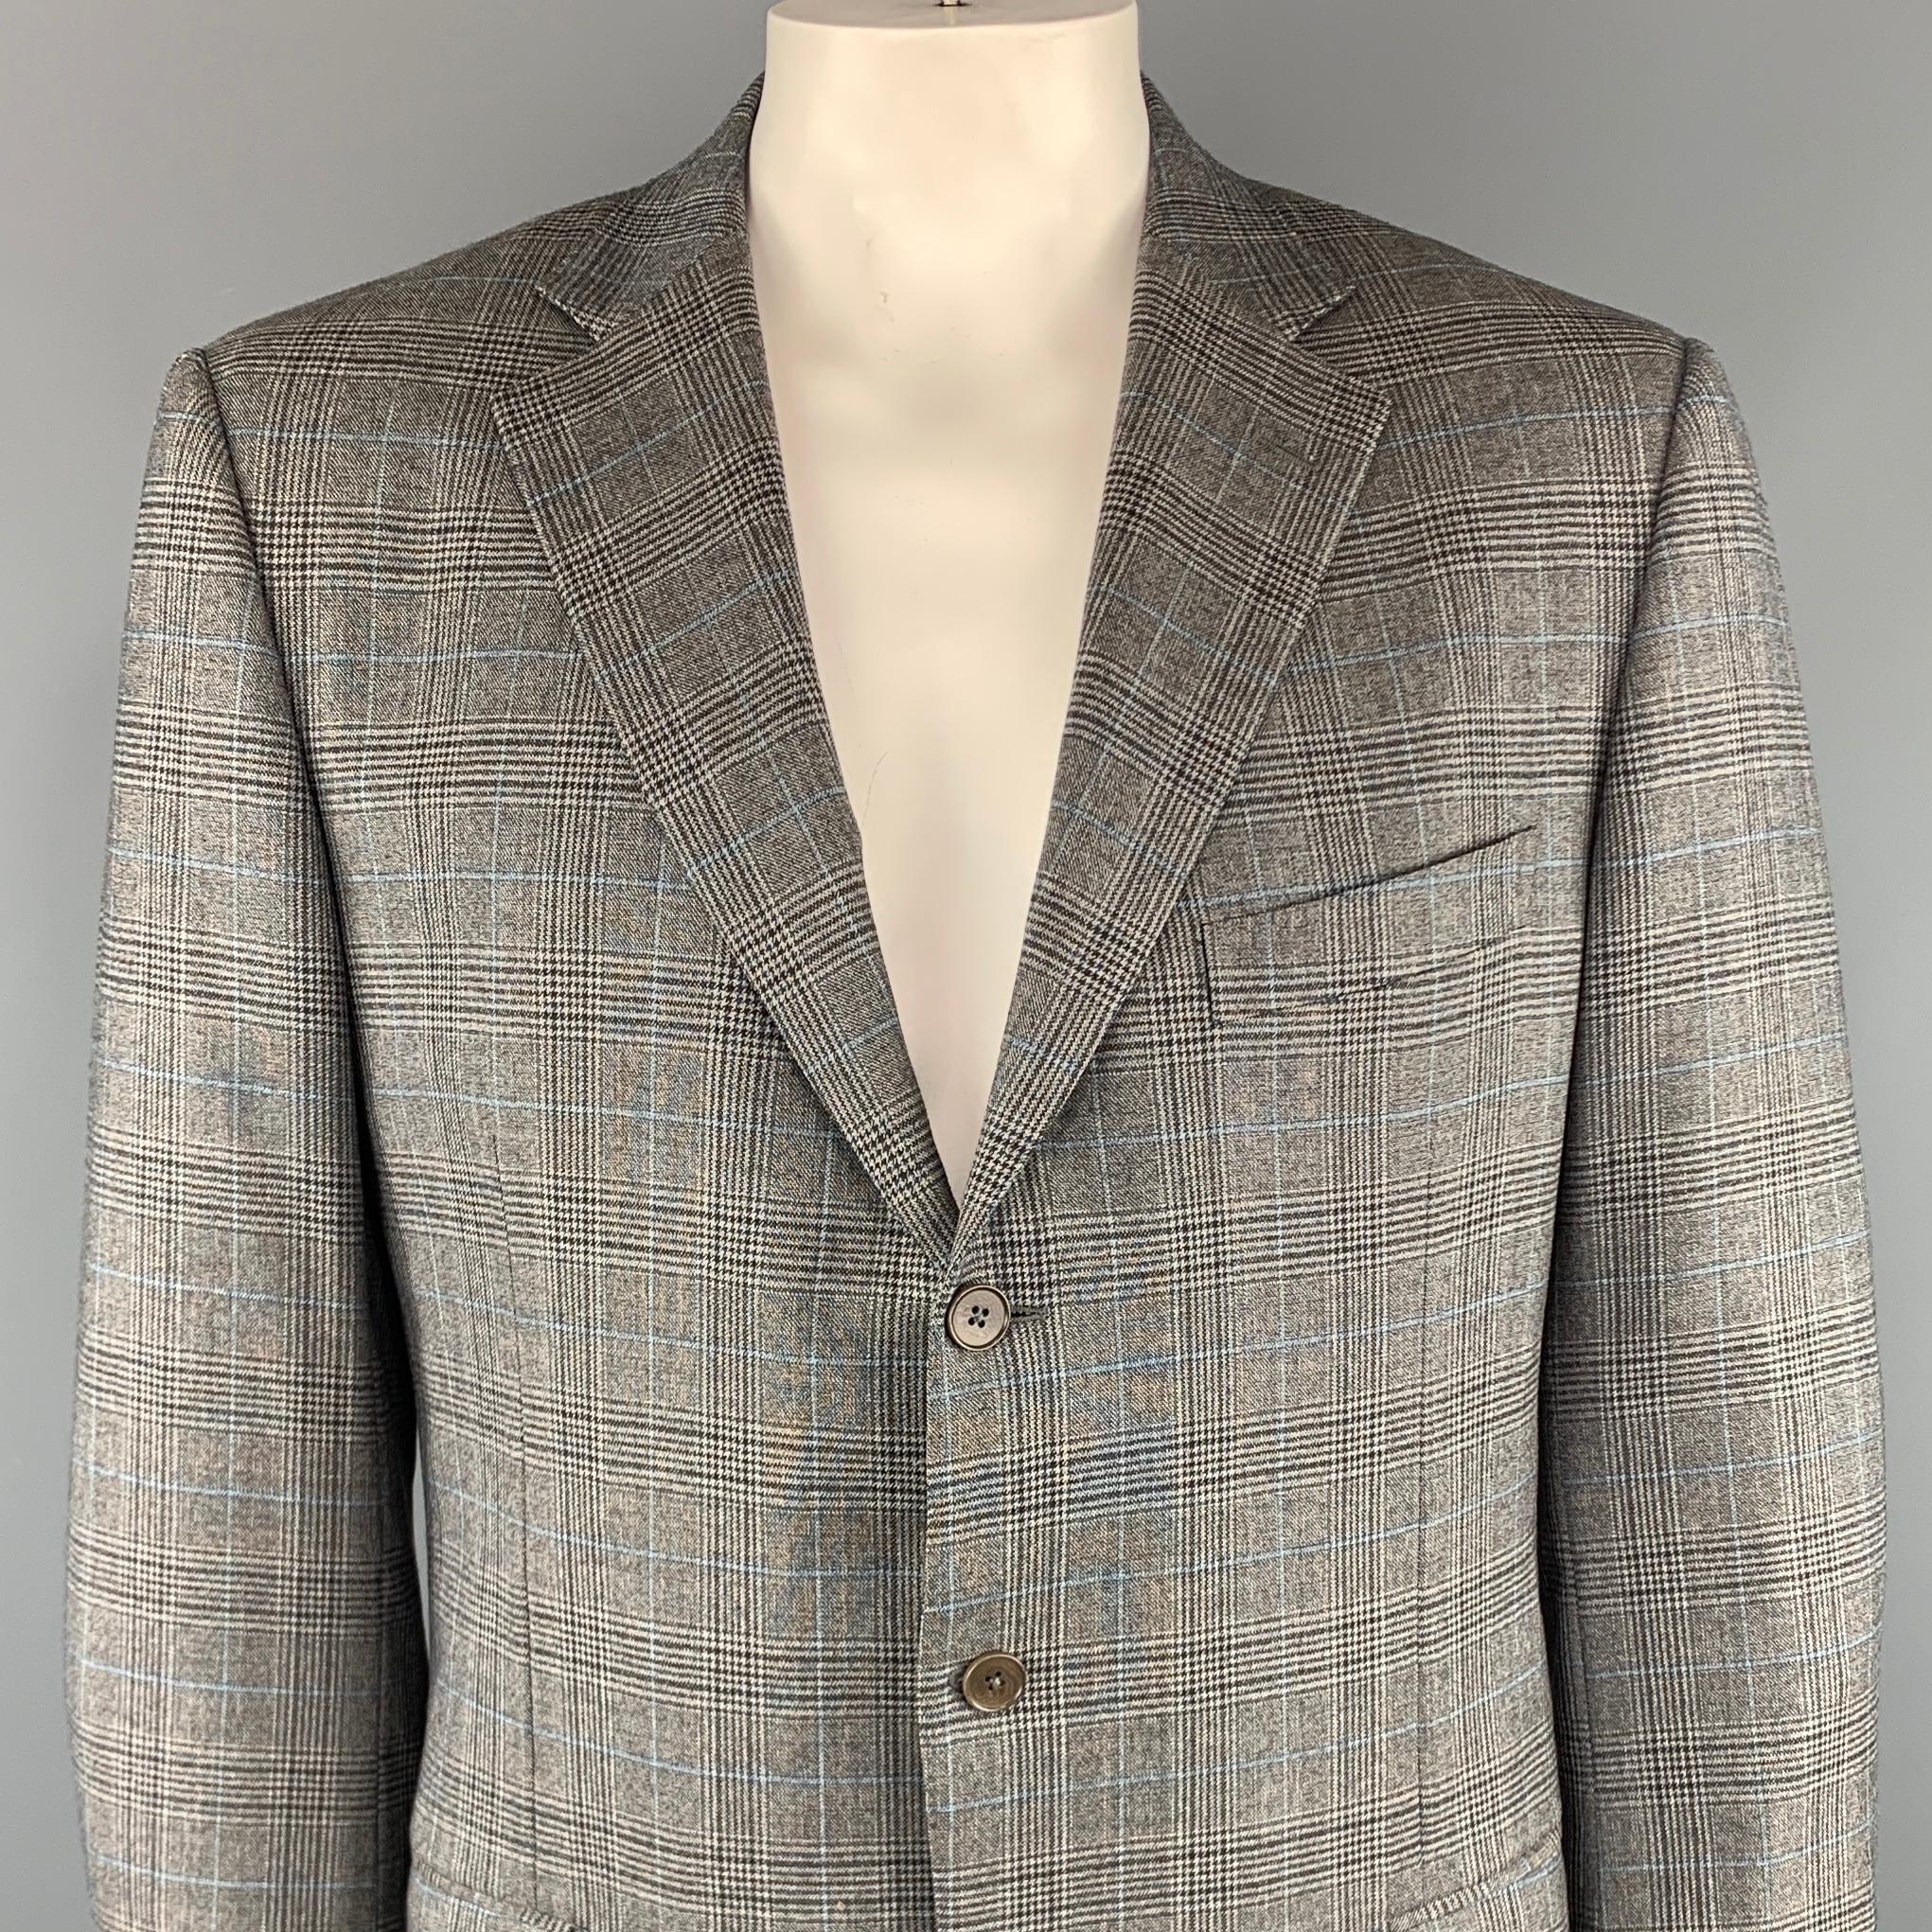 ERMENEGILDO ZEGNA sport coat comes in a gray plaid wool with a notch lapel, flap pockets, and a three button closure. Made in Italy

Pre-Owned Condition. 
Marked: IT 56 L 

Measurements:

Shoulder: 19 in.
Chest: 40 in. 
Sleeve: 27 in. 
Length: 32